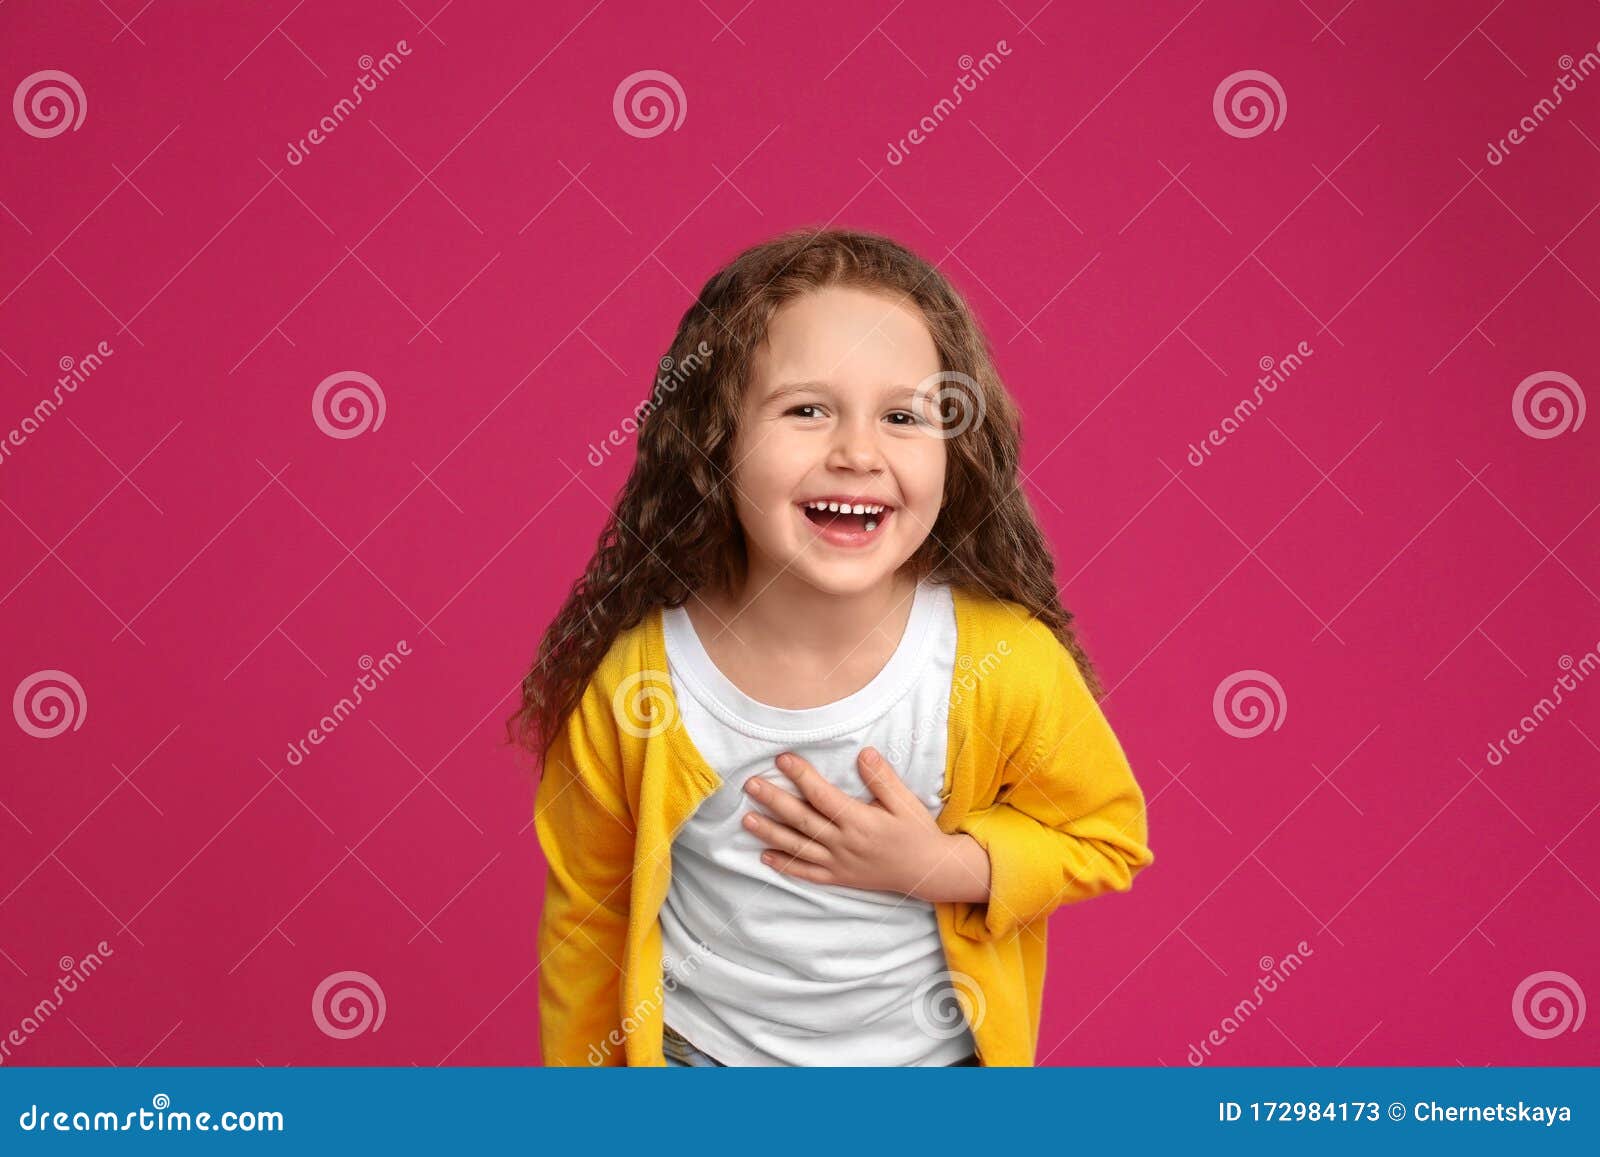 Portrait of Cute Little Girl on Pink Stock Image - Image of person ...